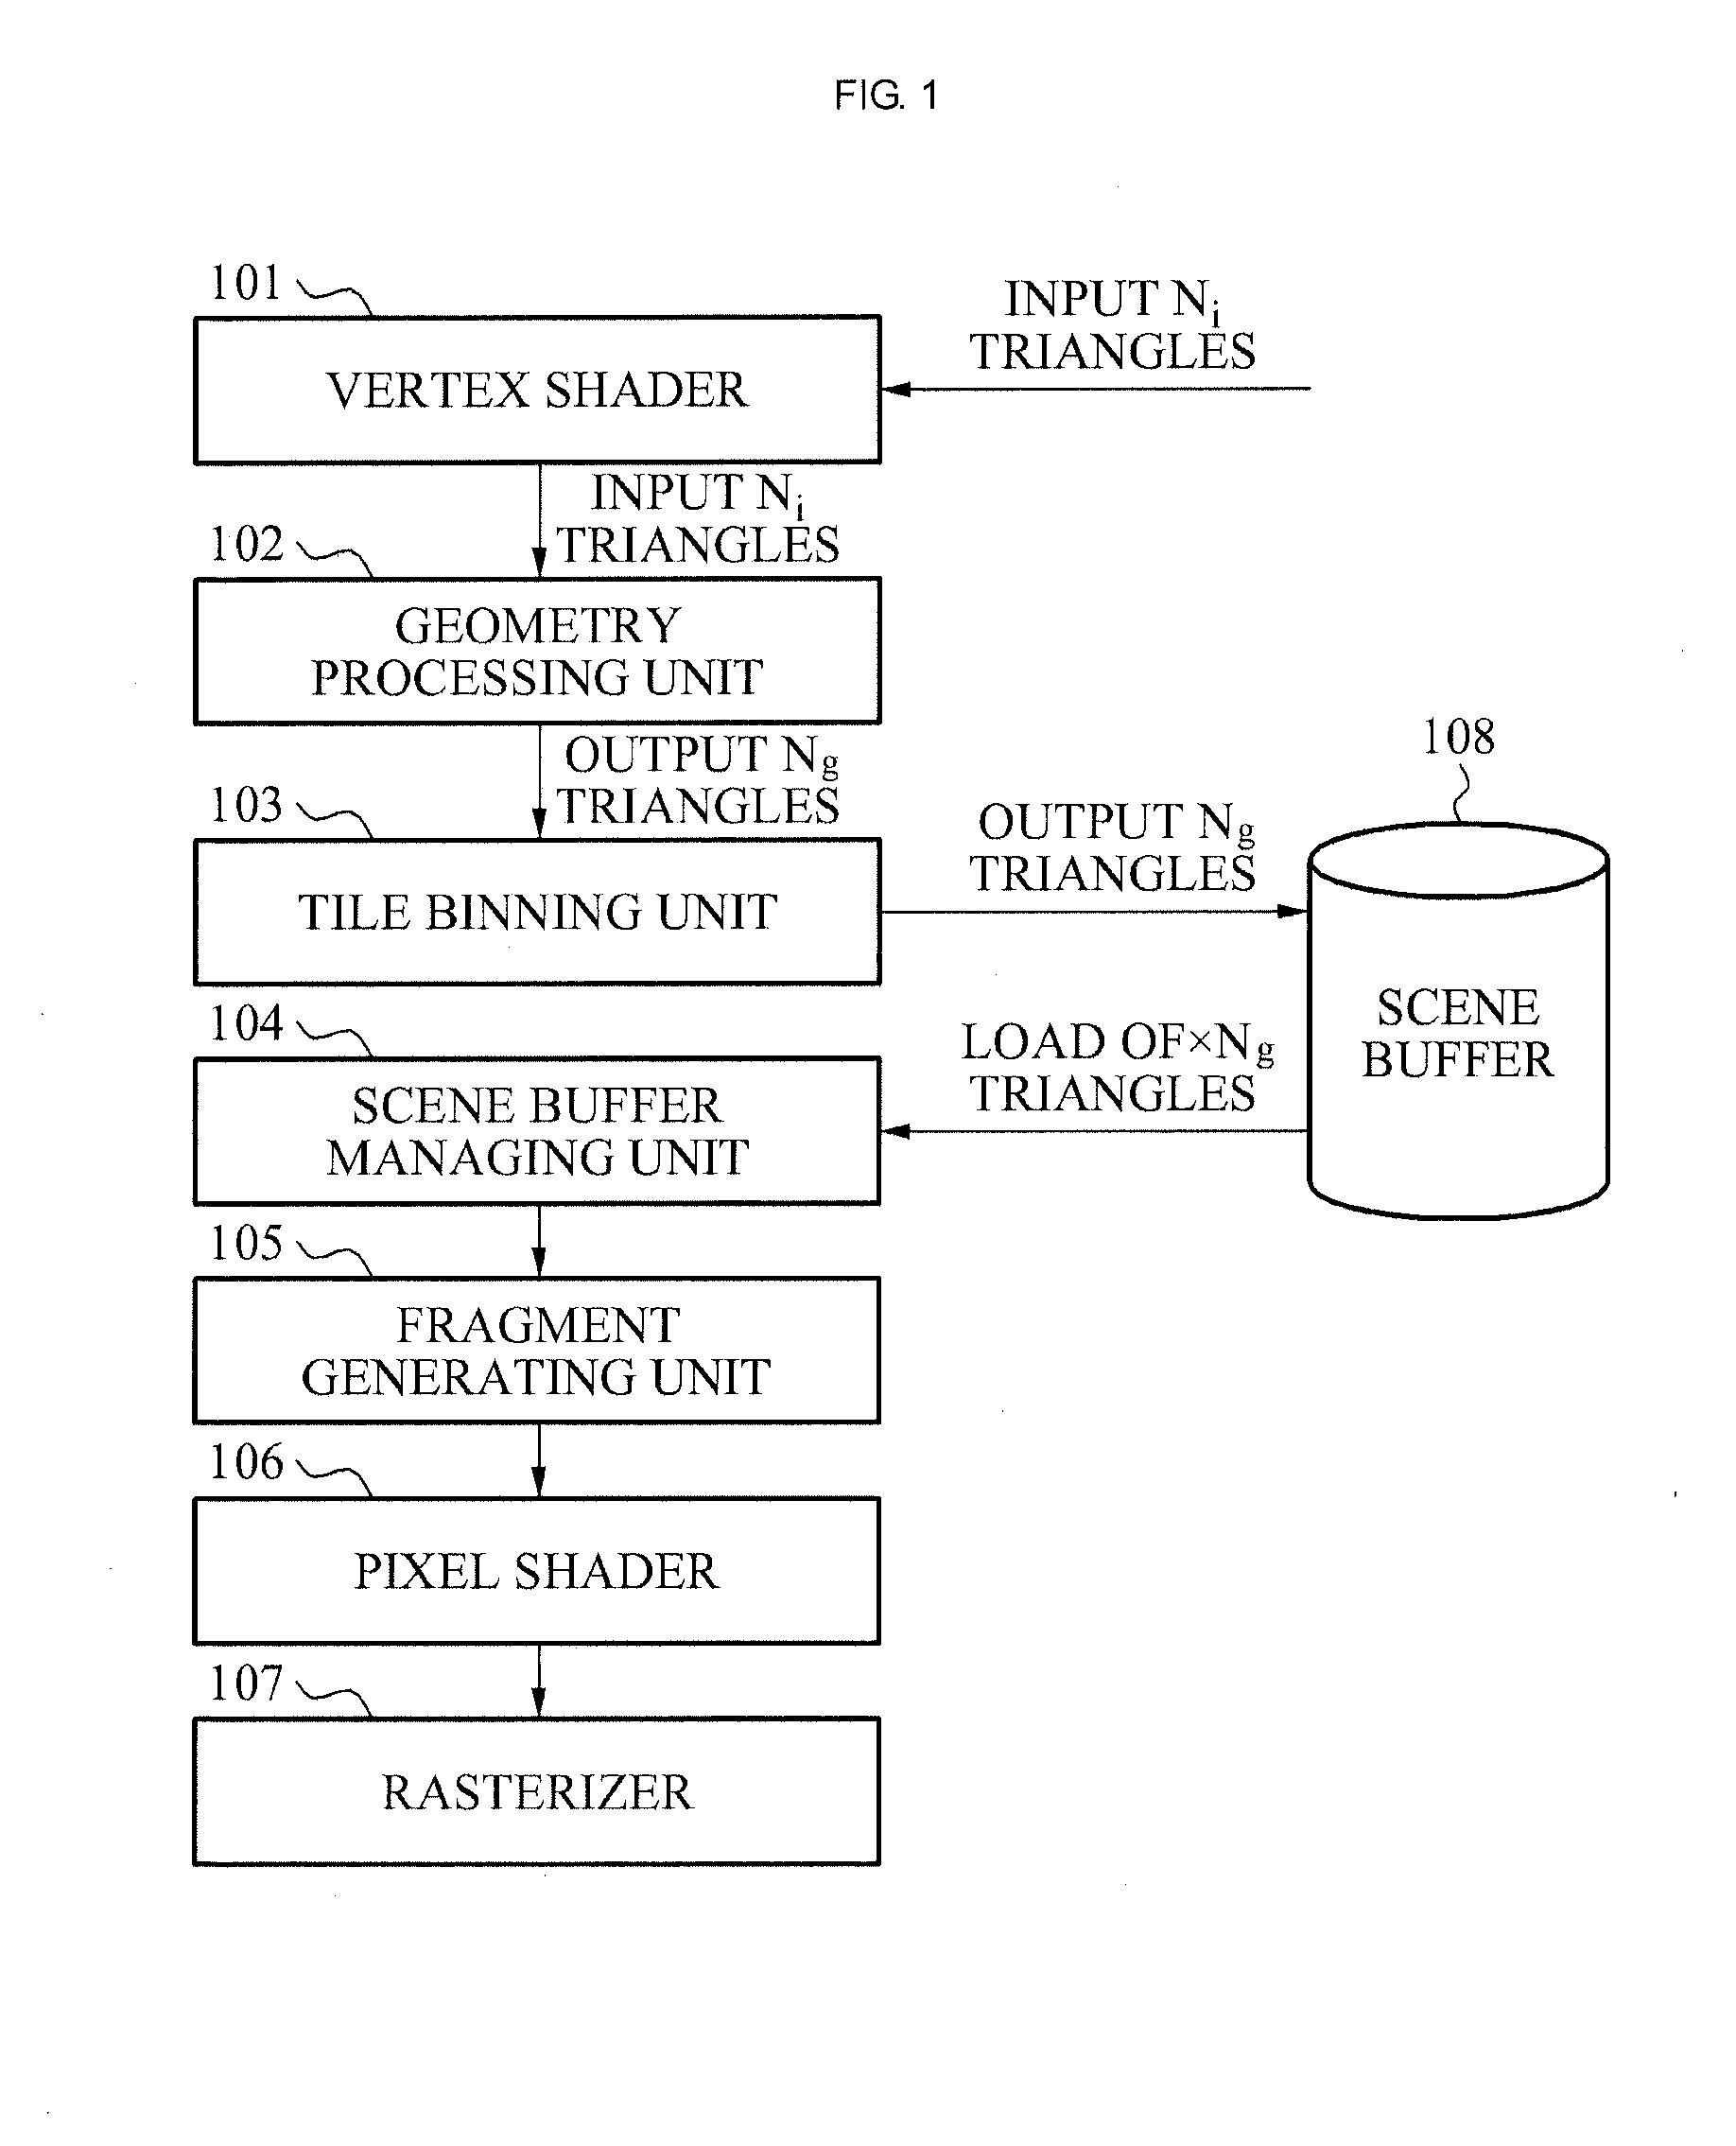 Apparatus and method for tile binning to reduce power consumption